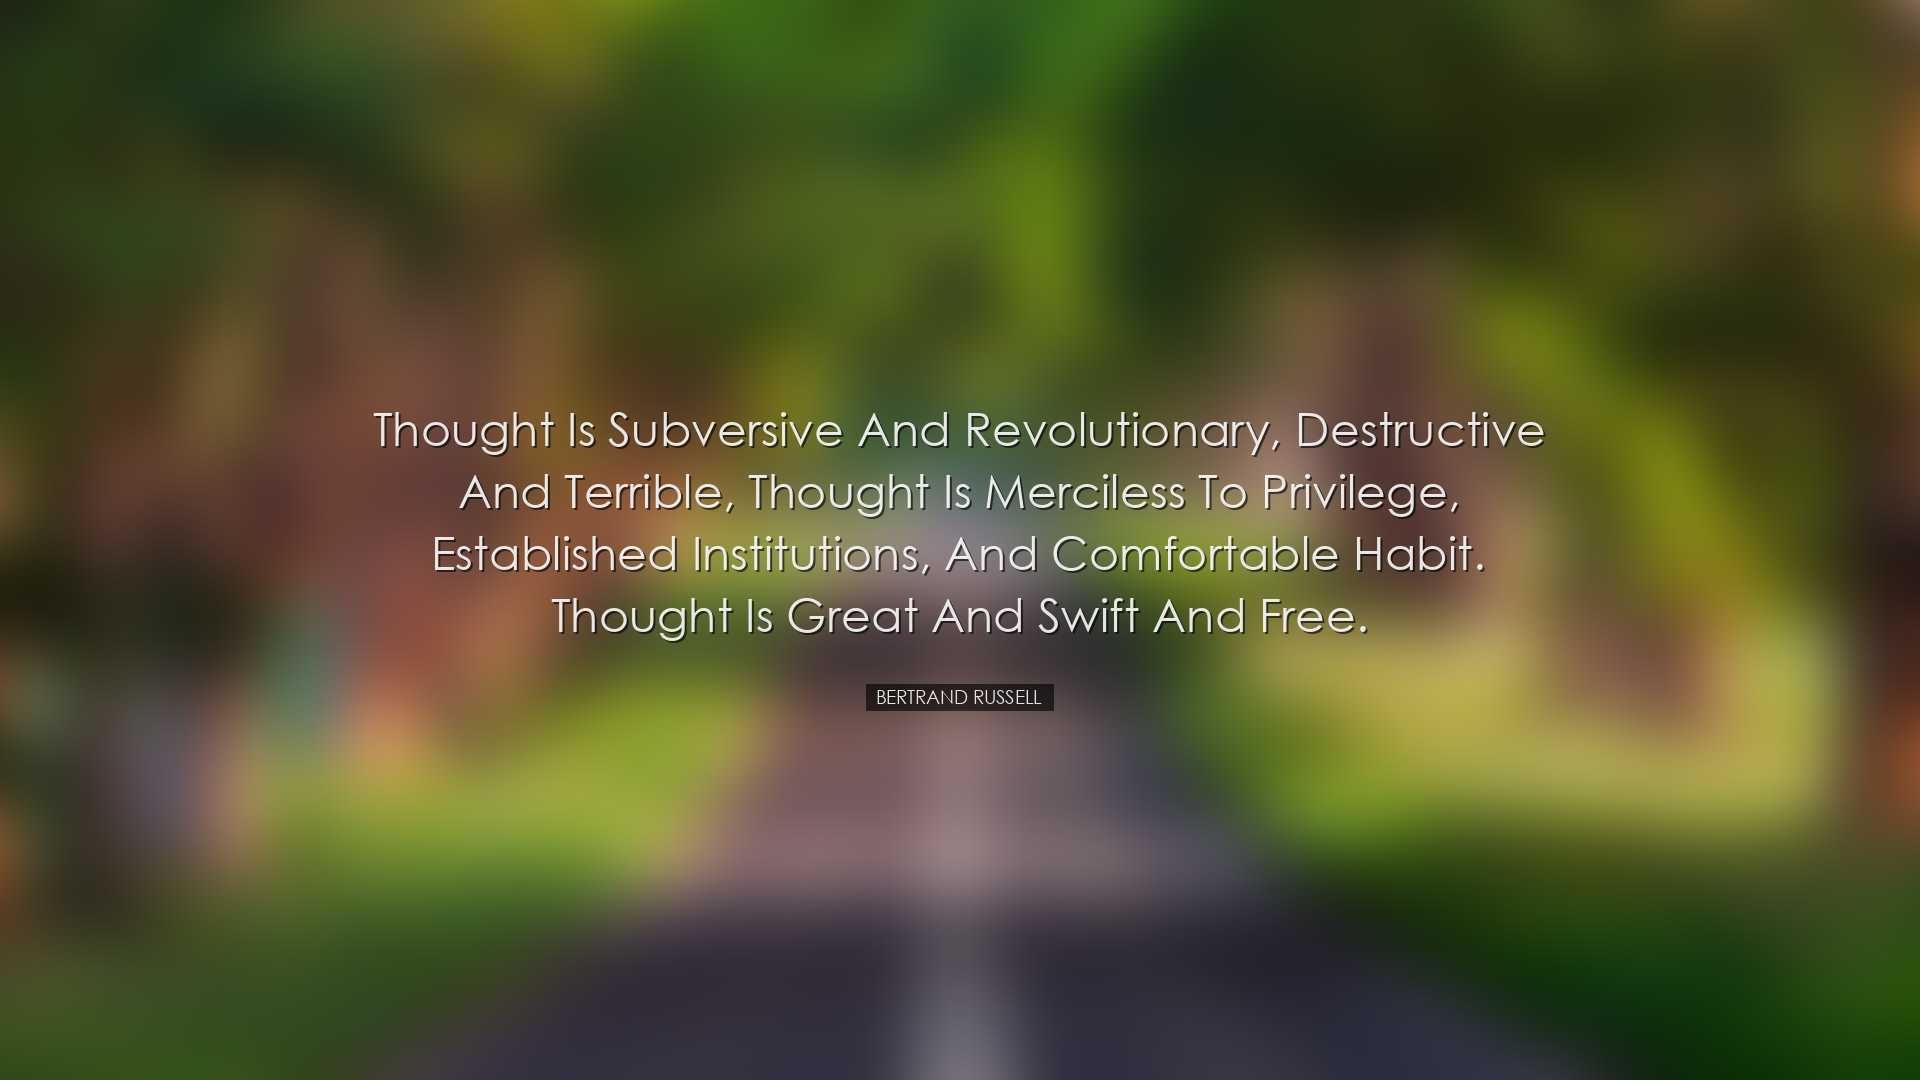 Thought is subversive and revolutionary, destructive and terrible,